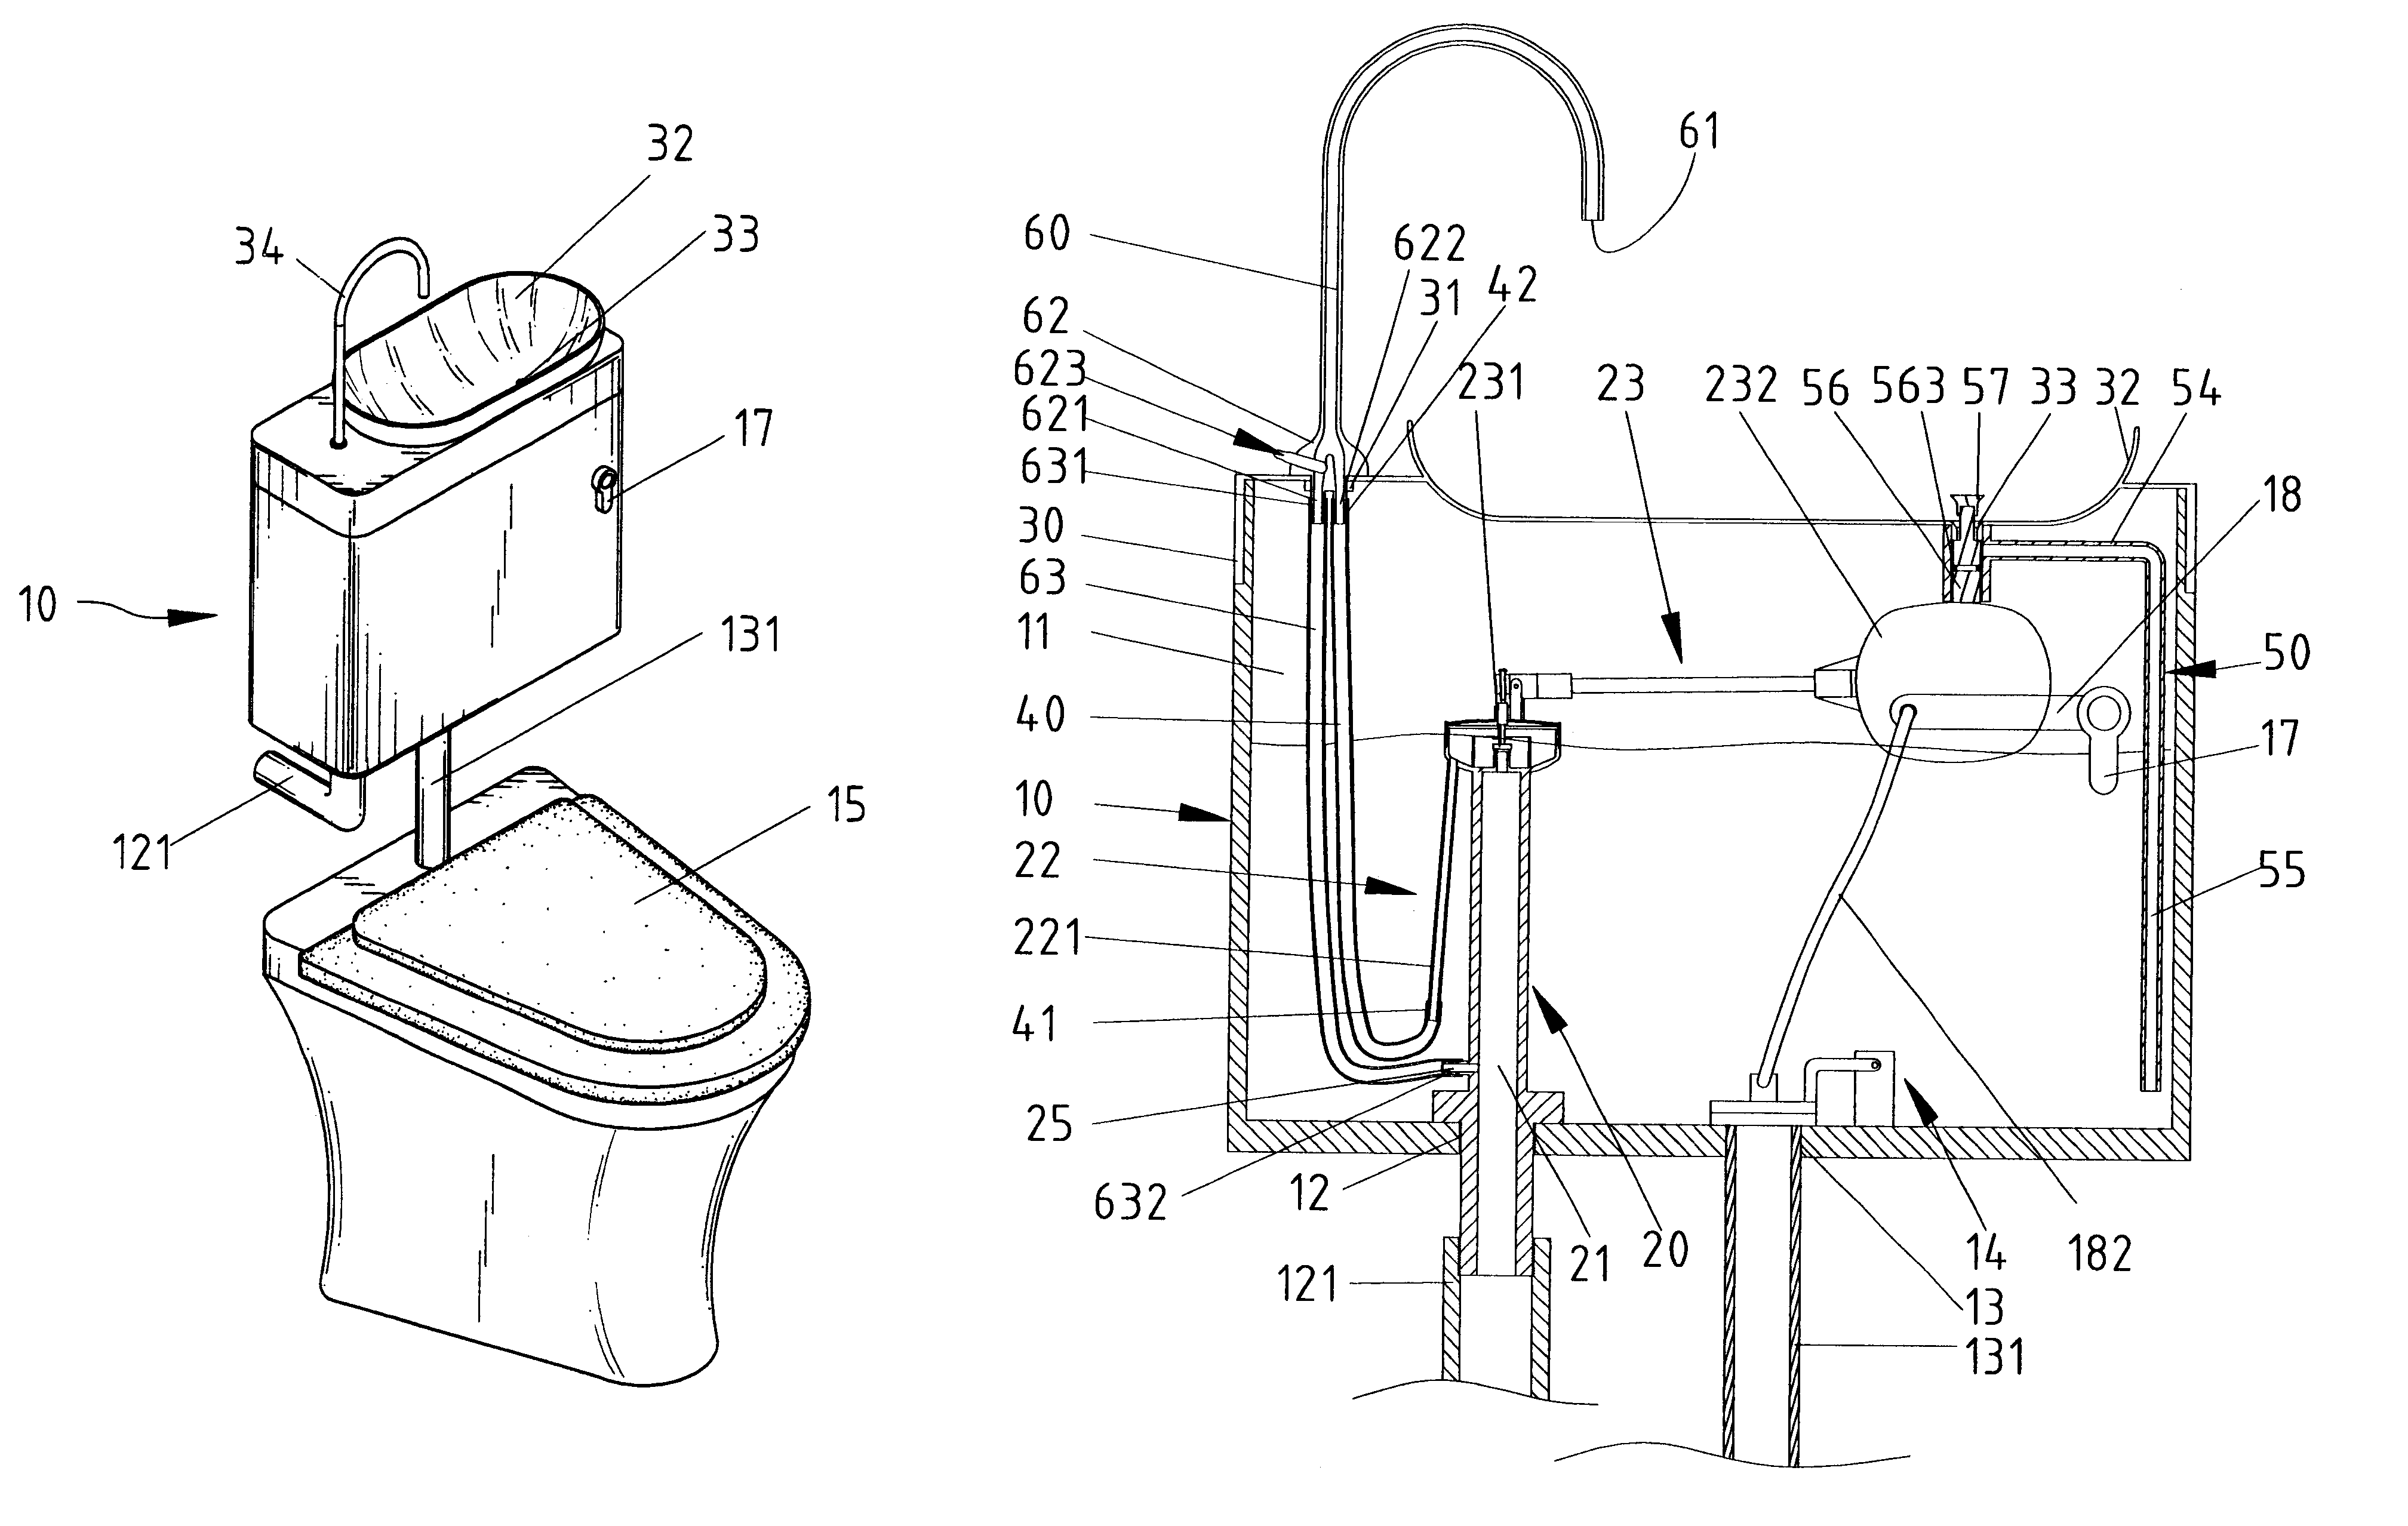 Water-saving device for a toilet having a sink with a float-operated drain valve